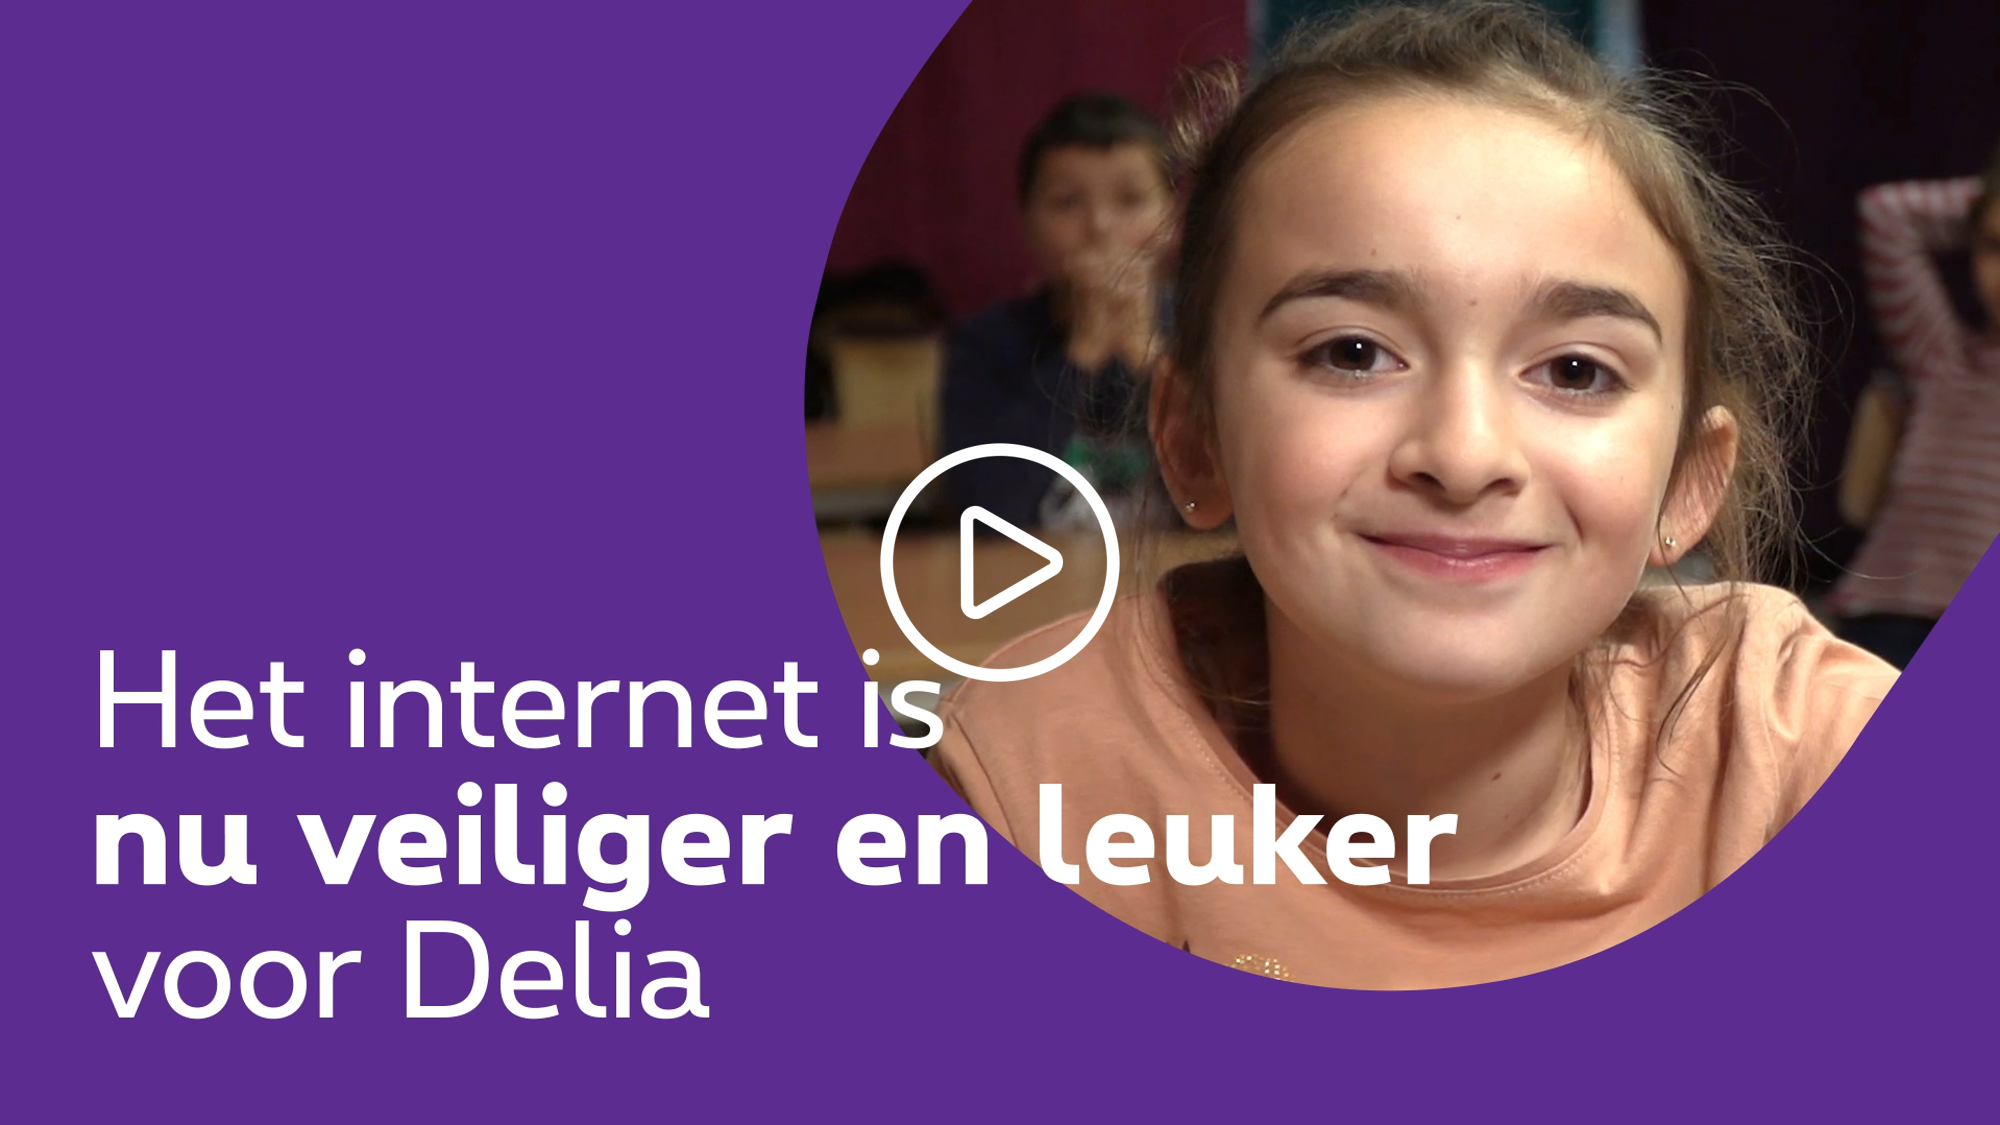 Internet is now safe and fun for Delia - click to discover the video